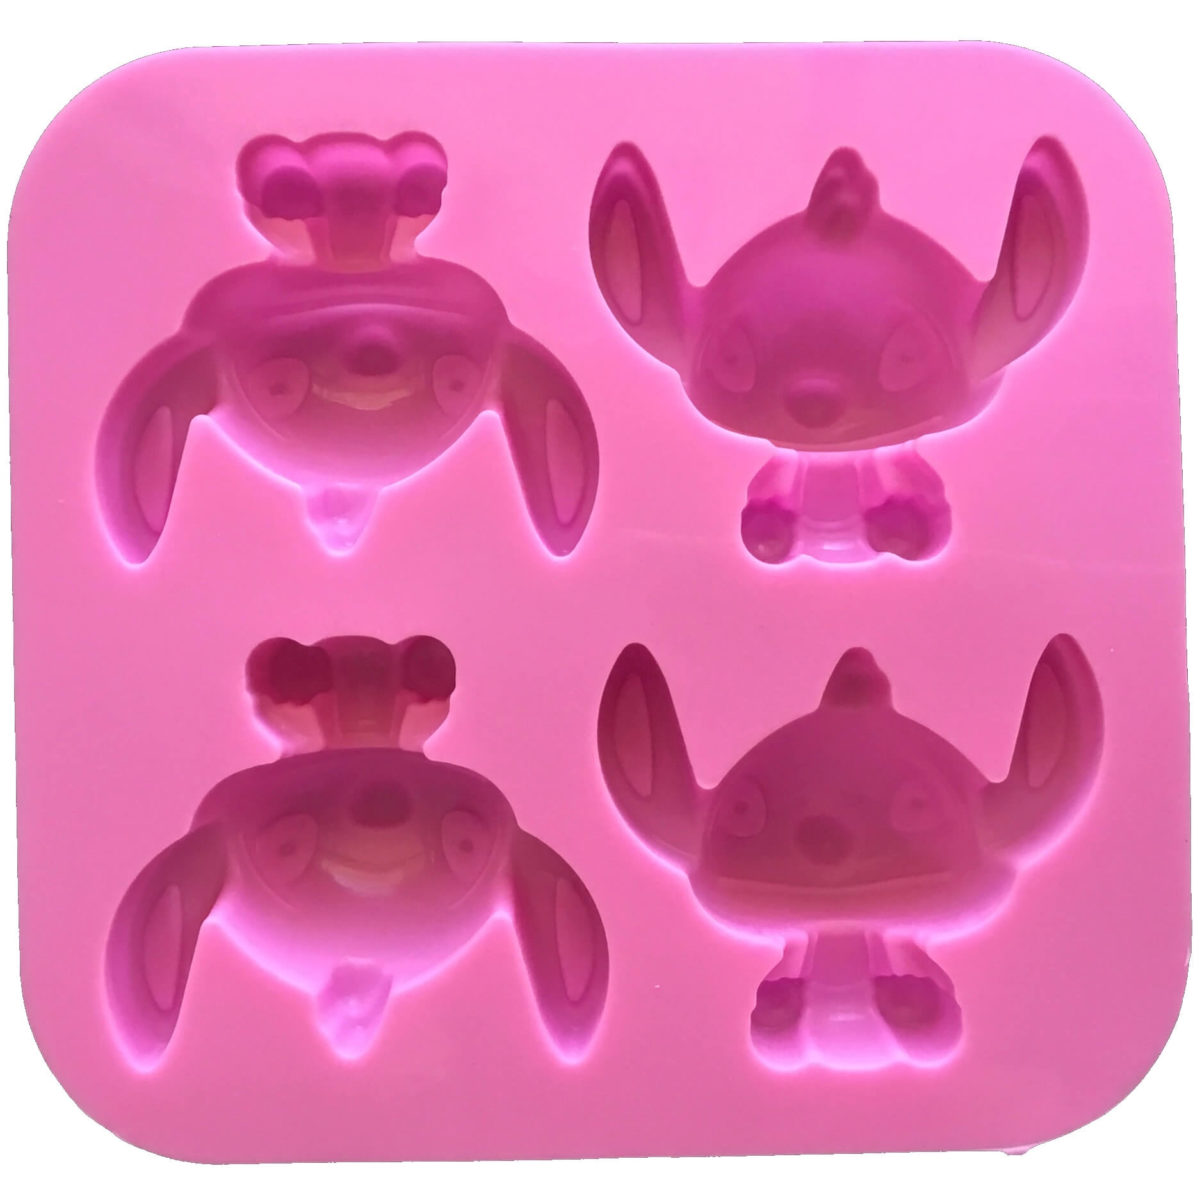 back of pink four cavity silicone mould with identical alien stich cavites showing mould cavity details